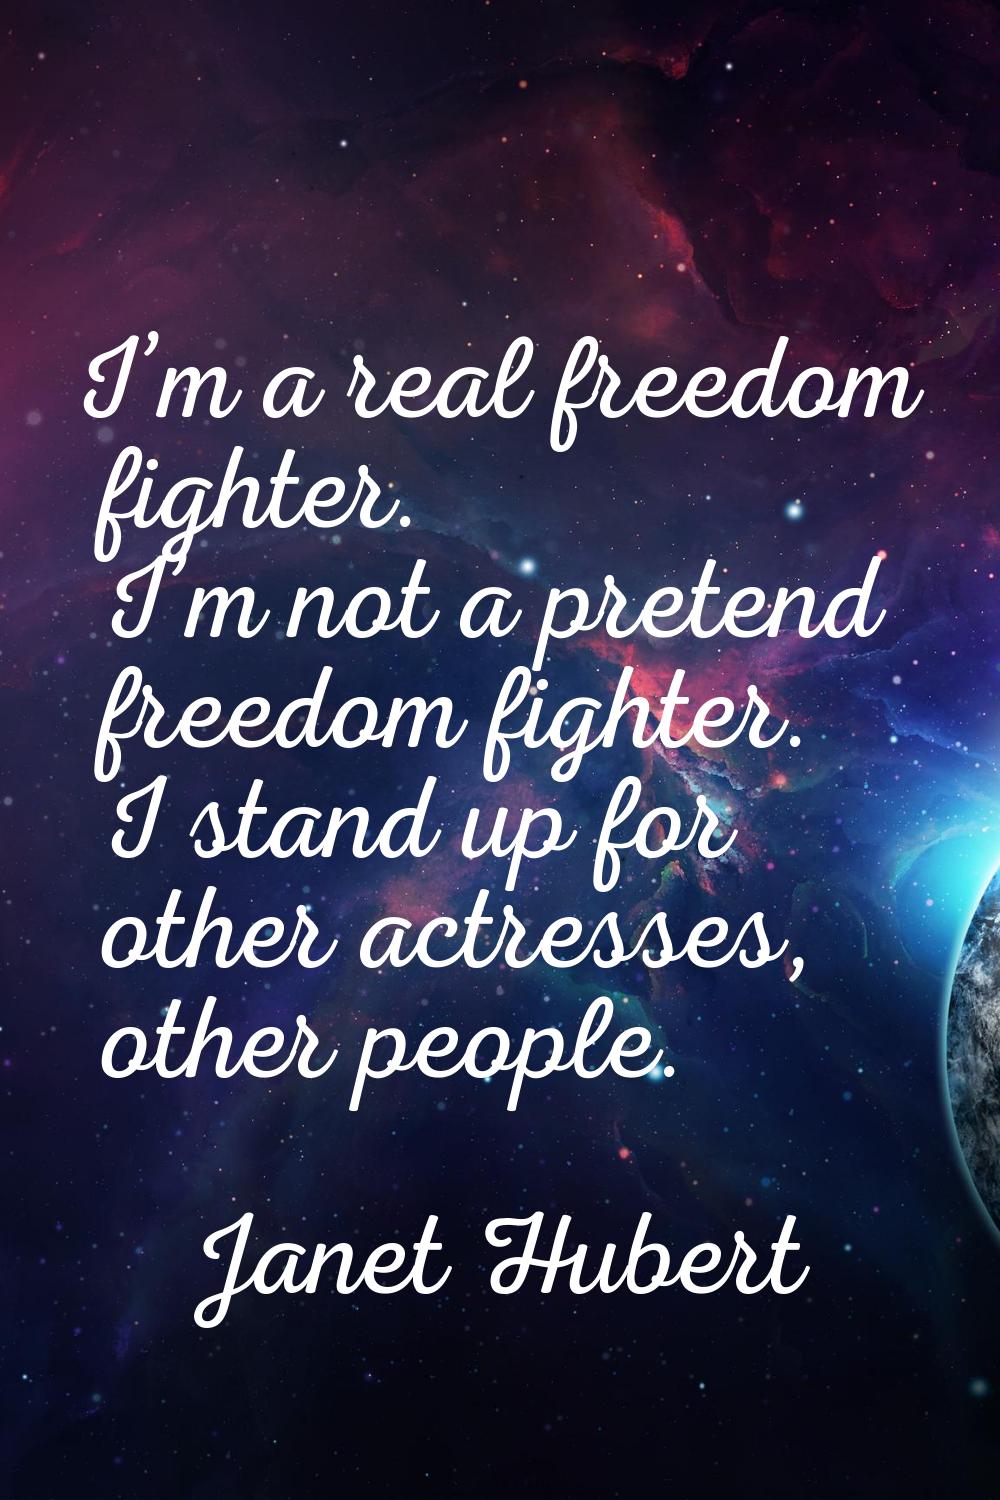 I’m a real freedom fighter. I’m not a pretend freedom fighter. I stand up for other actresses, othe